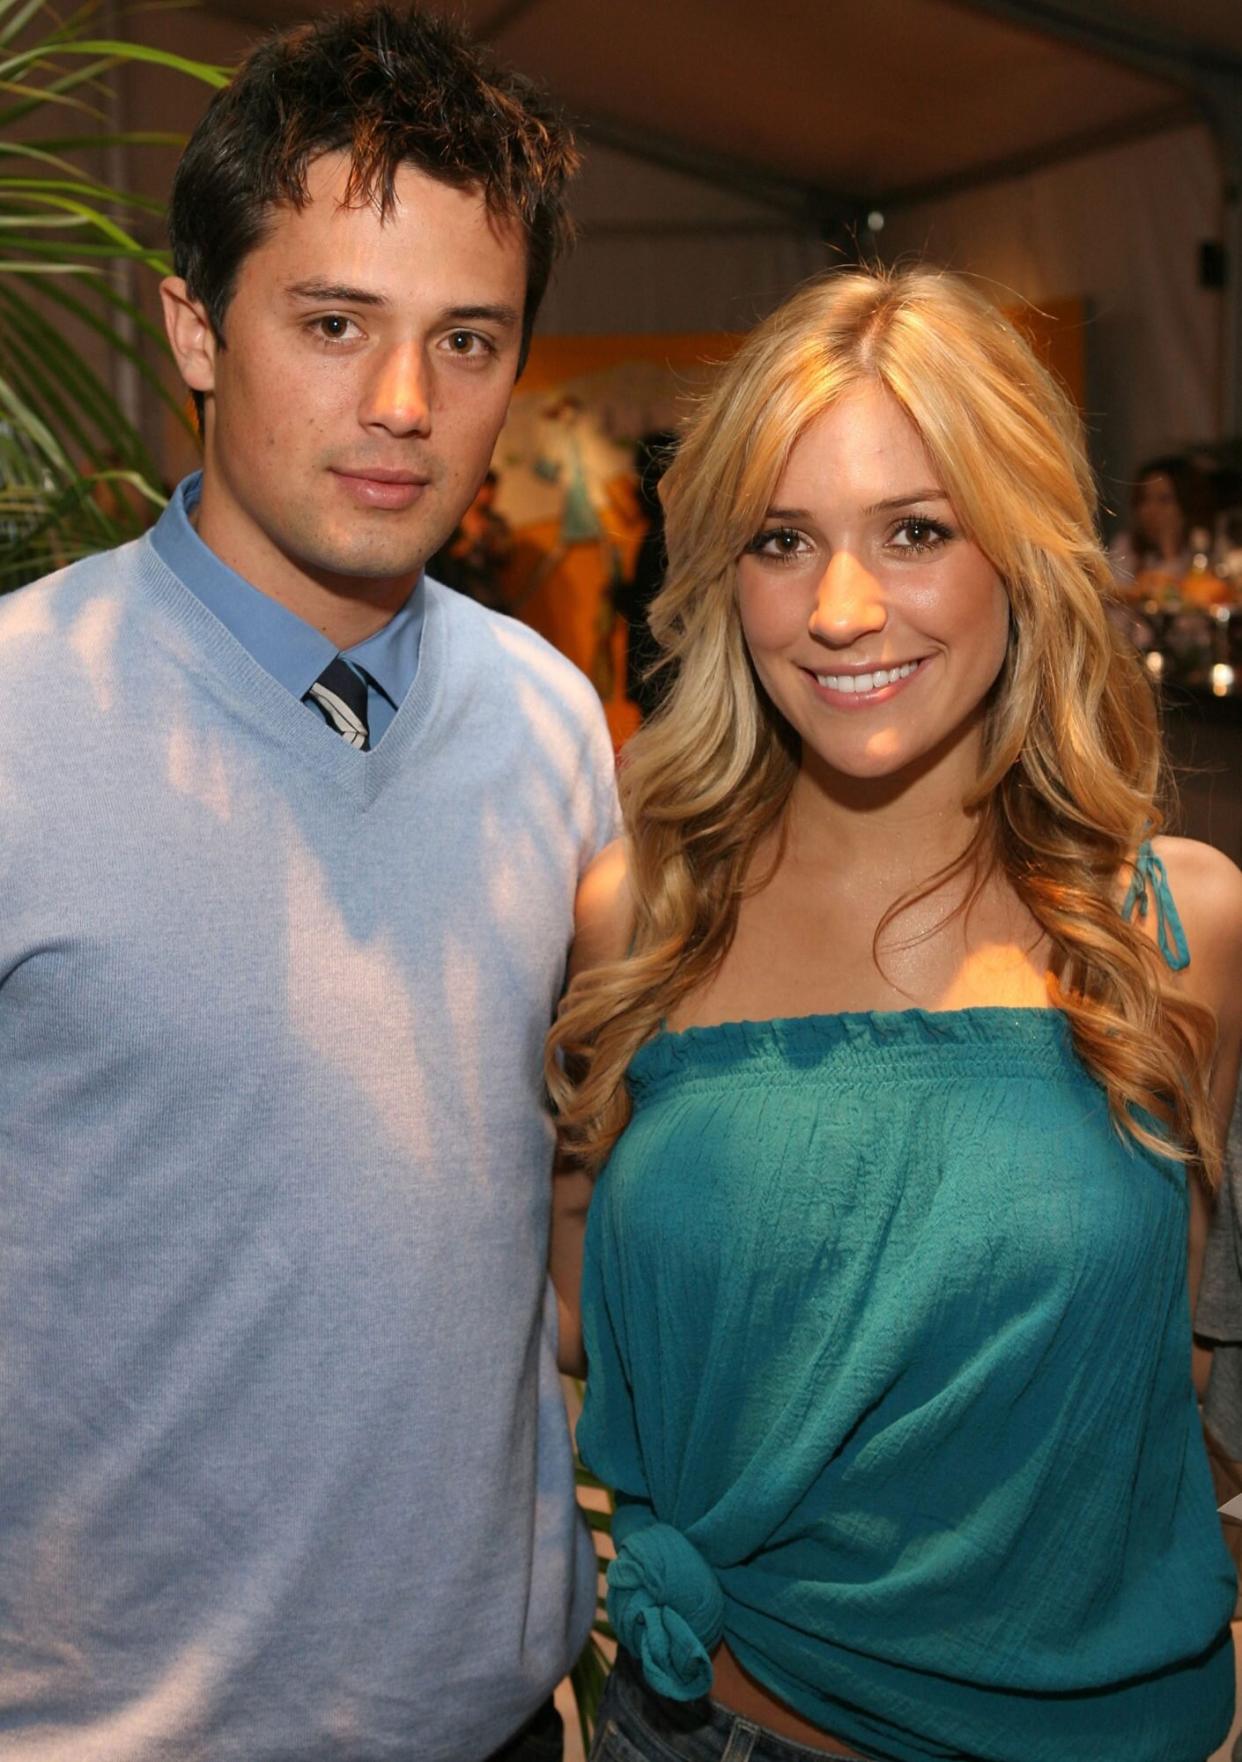 CULVER CITY, CA - MARCH 11: TV Personalities Stephen Colletti and Kristin Cavallari attend Mercedes-Benz Fashion Week held at Smashbox Studios on March 11, 2008 in Culver City, California. (Photo by Jesse Grant/Getty Images for IMG)